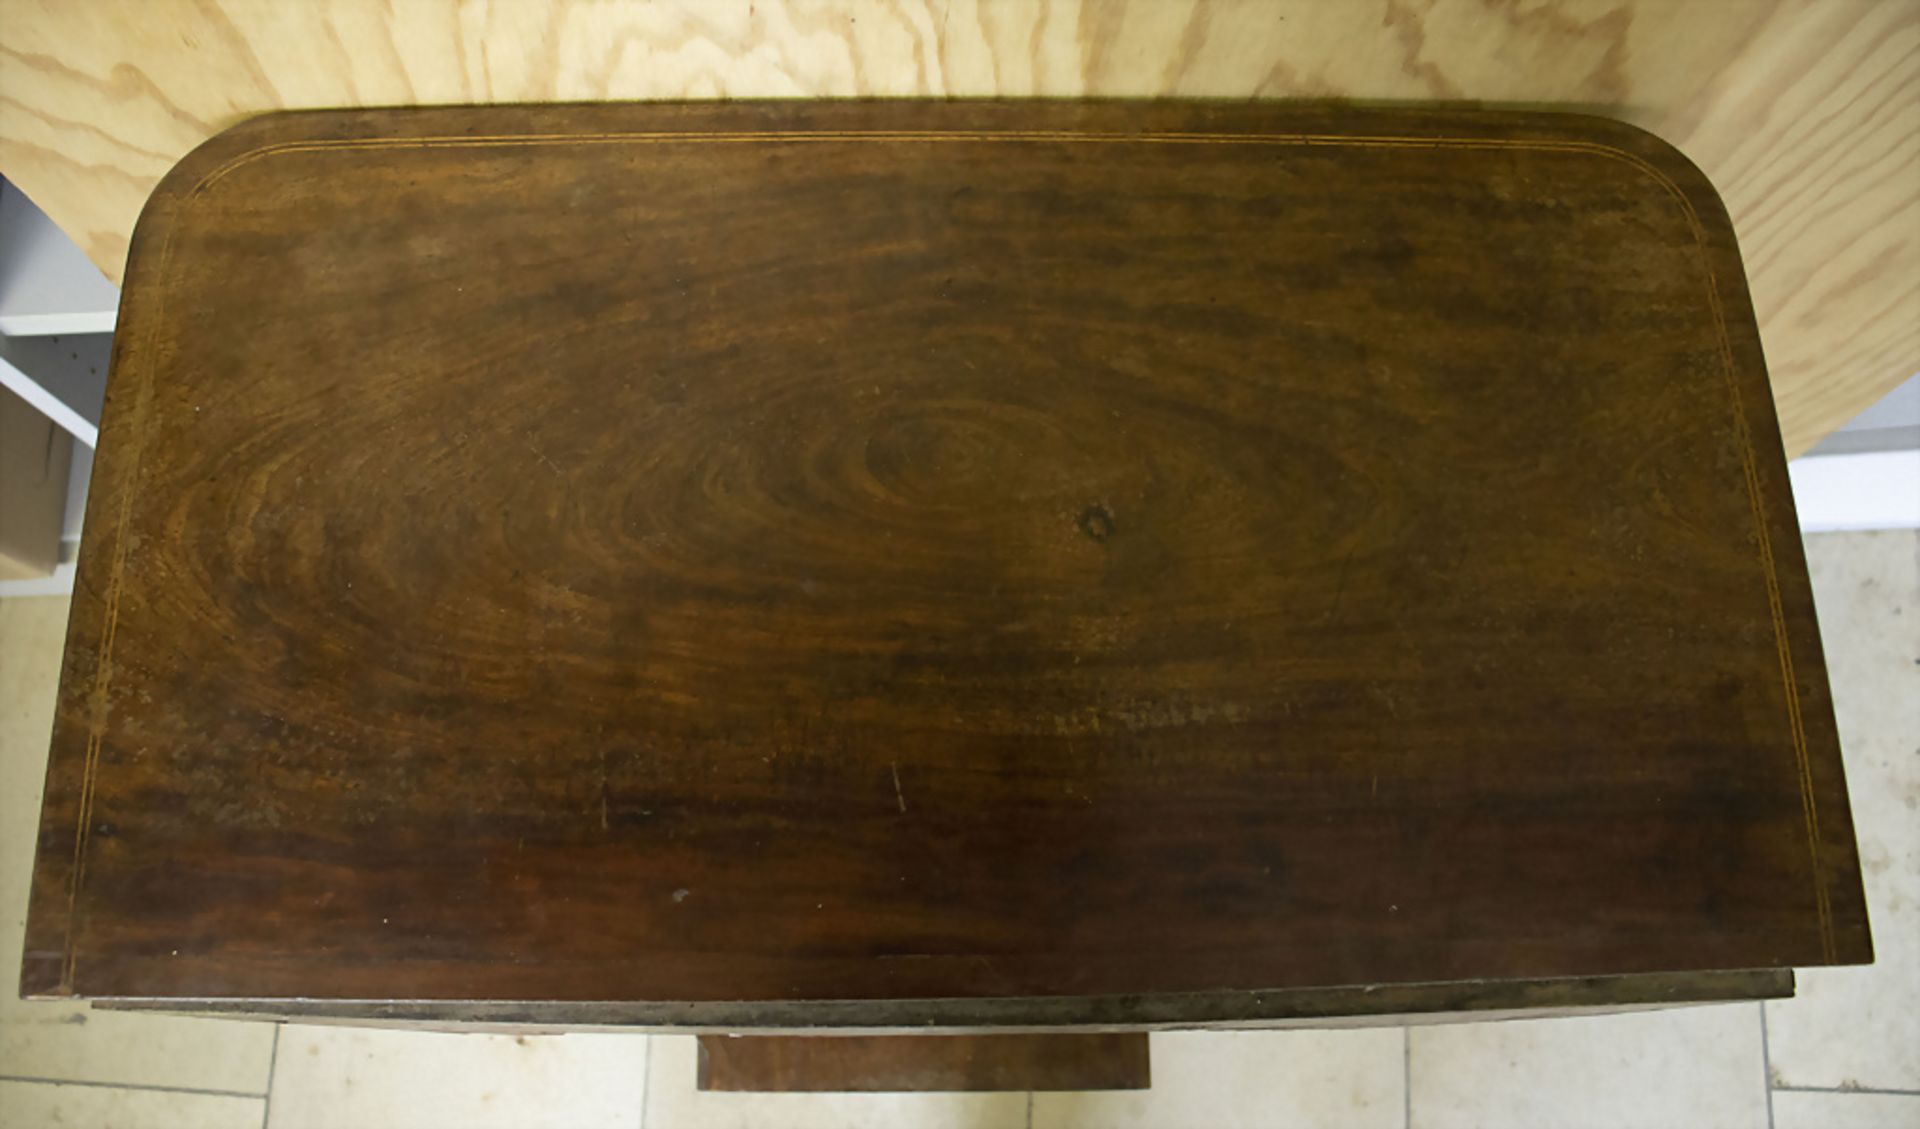 Empire Wandkonsole / Konsolentisch / A wooden console table, Frankreich, Anfang 18. Jh. - Image 7 of 9